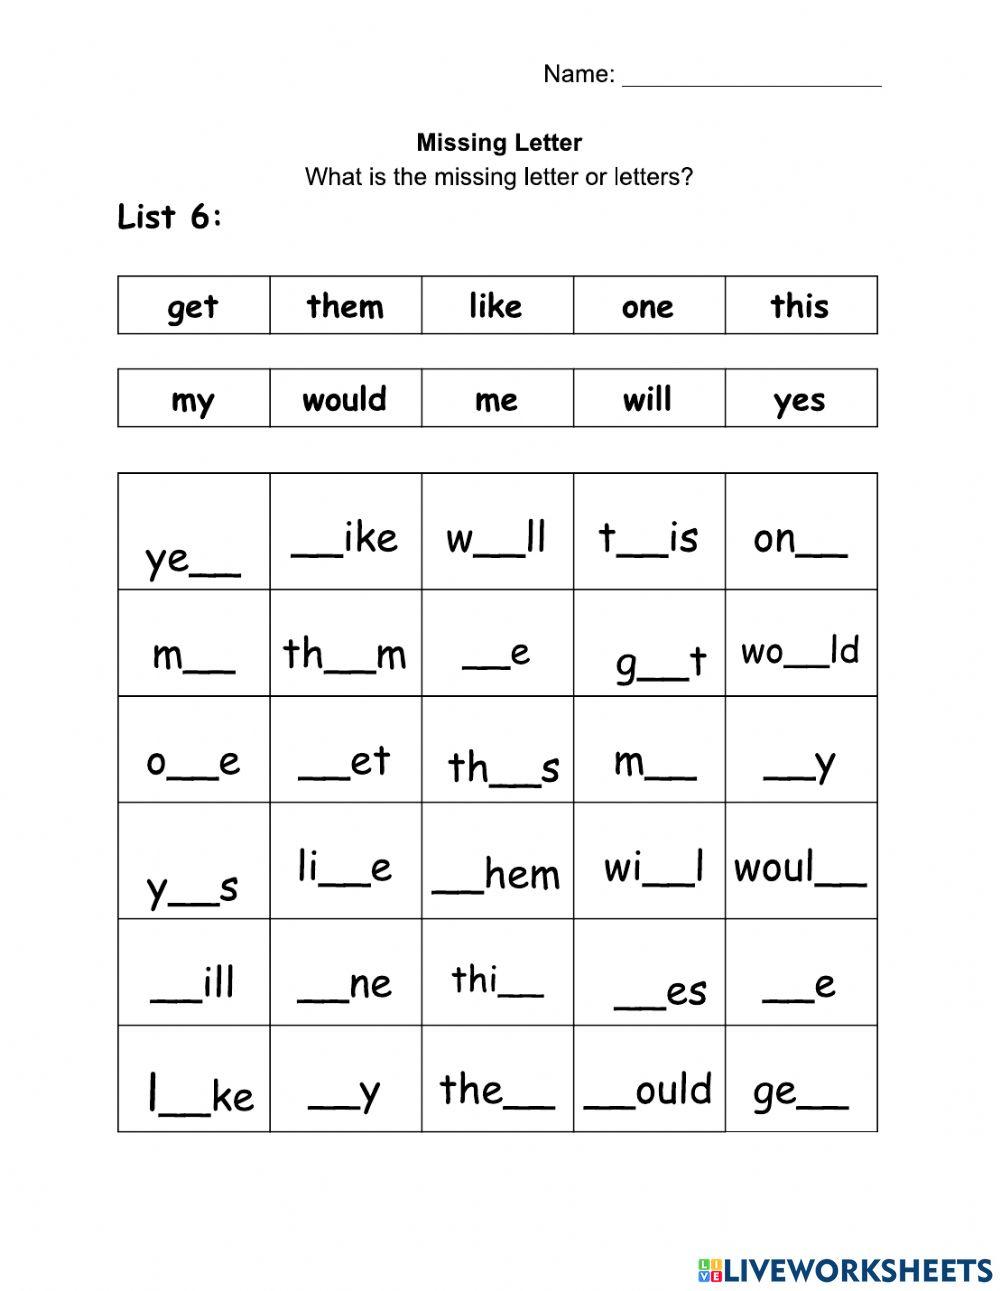 WOW - List 6 - 10 Words - Missing Letters